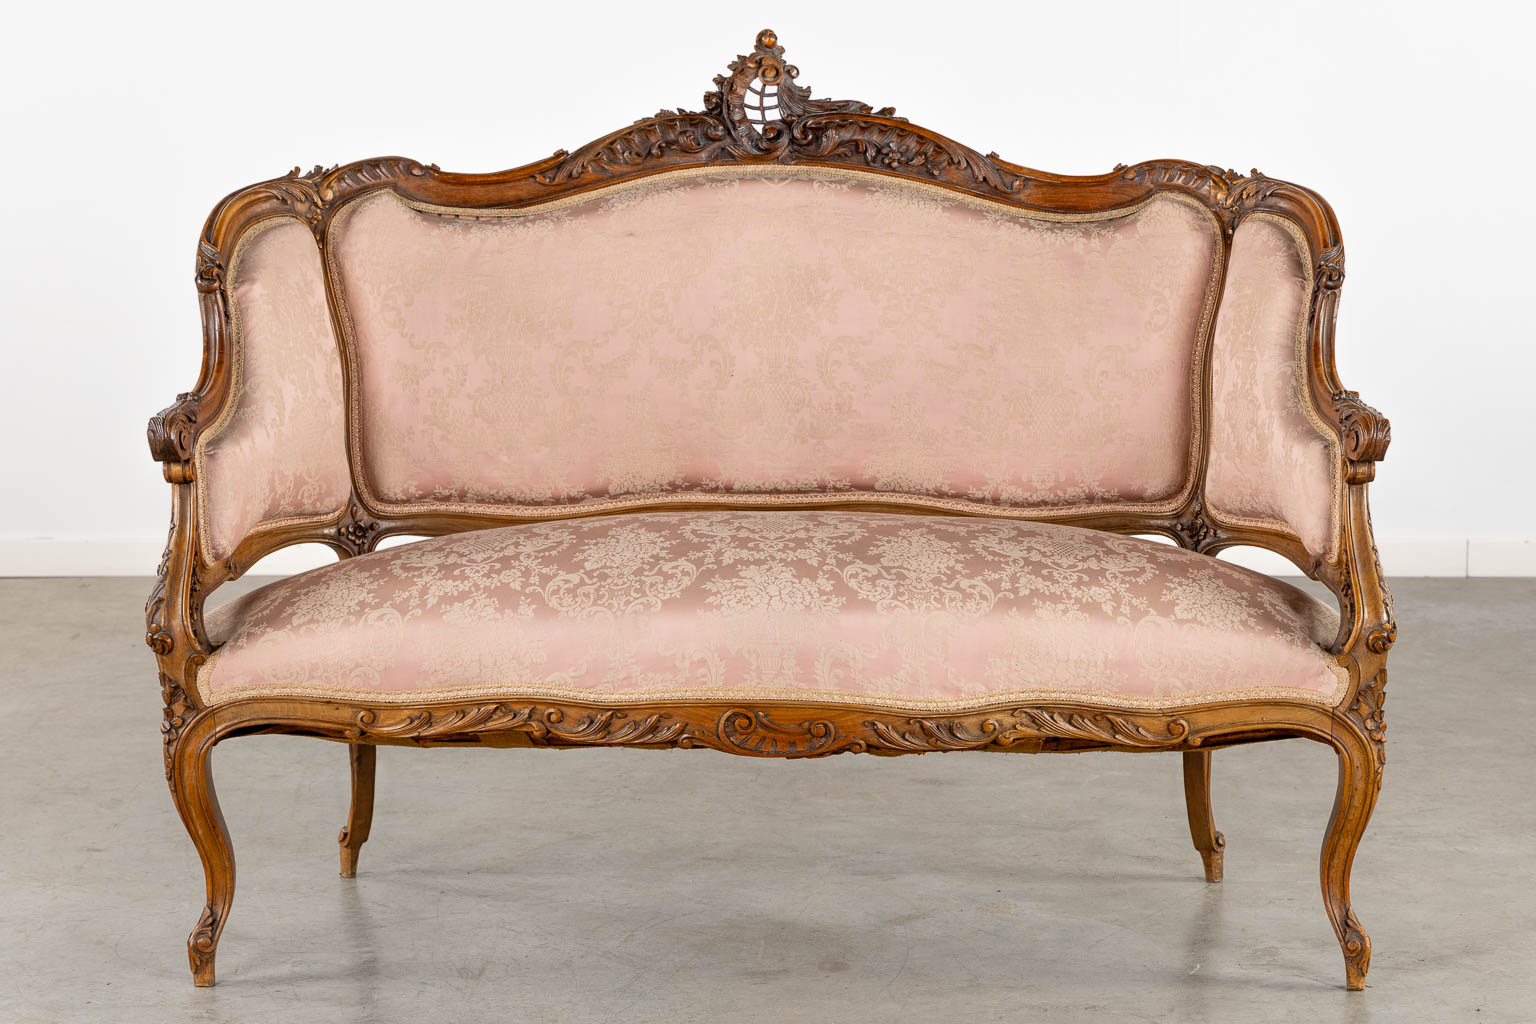 An 8-piece salon suite, sculptured wood in Louis XV style. Circa 1900. (L:67 x W:135 x H:103 cm) - Image 3 of 33